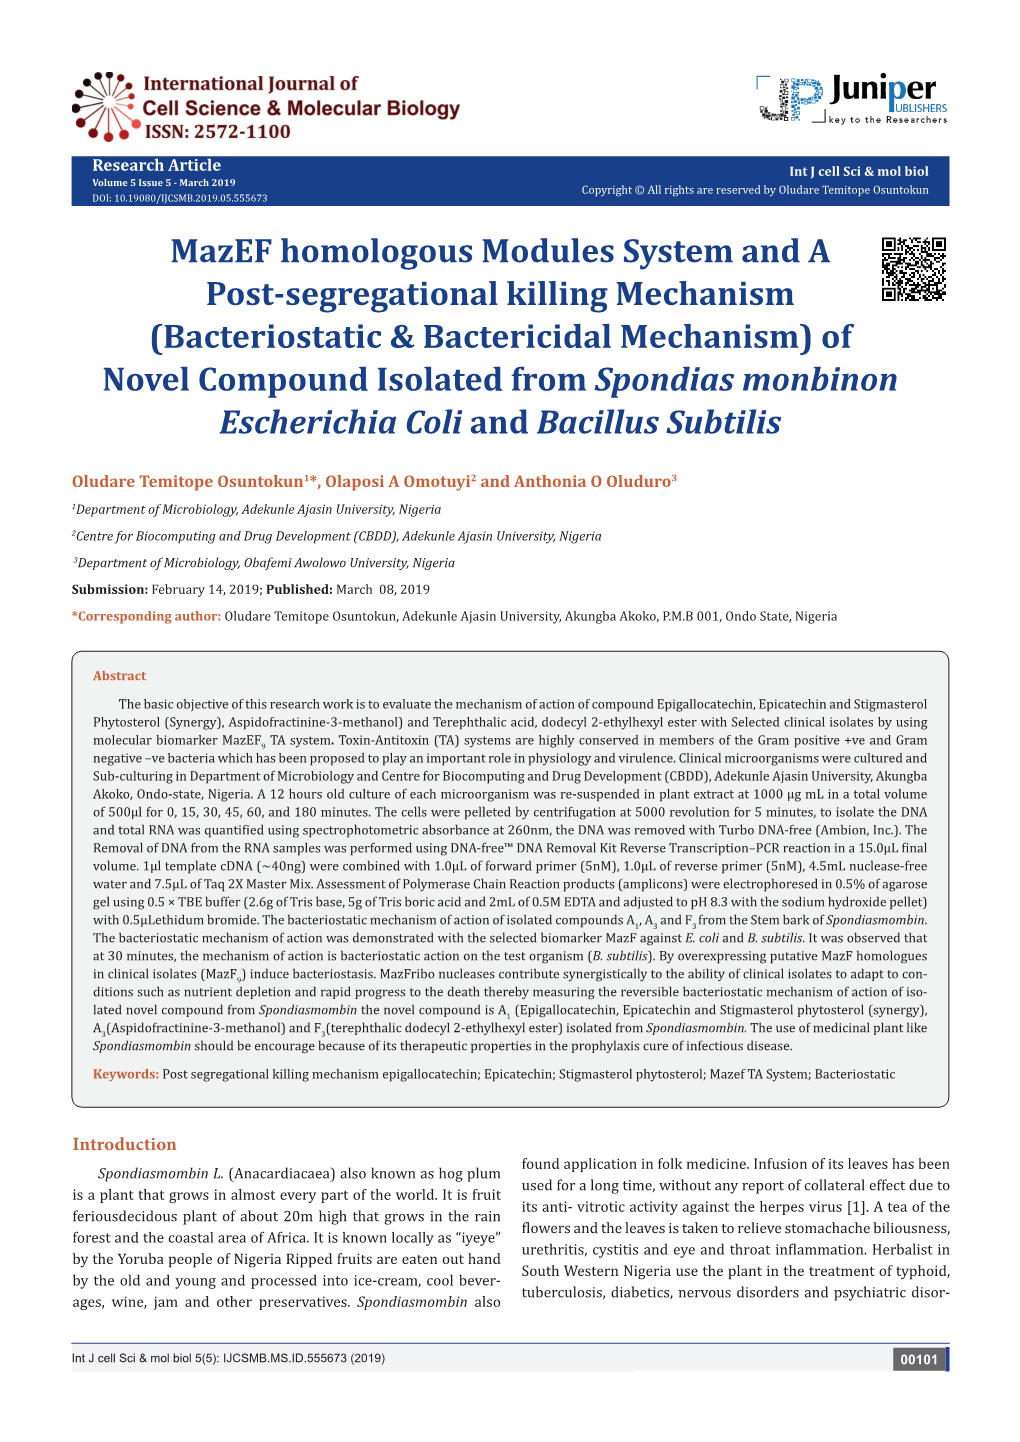 Mazefhomologous Modules System and a Post